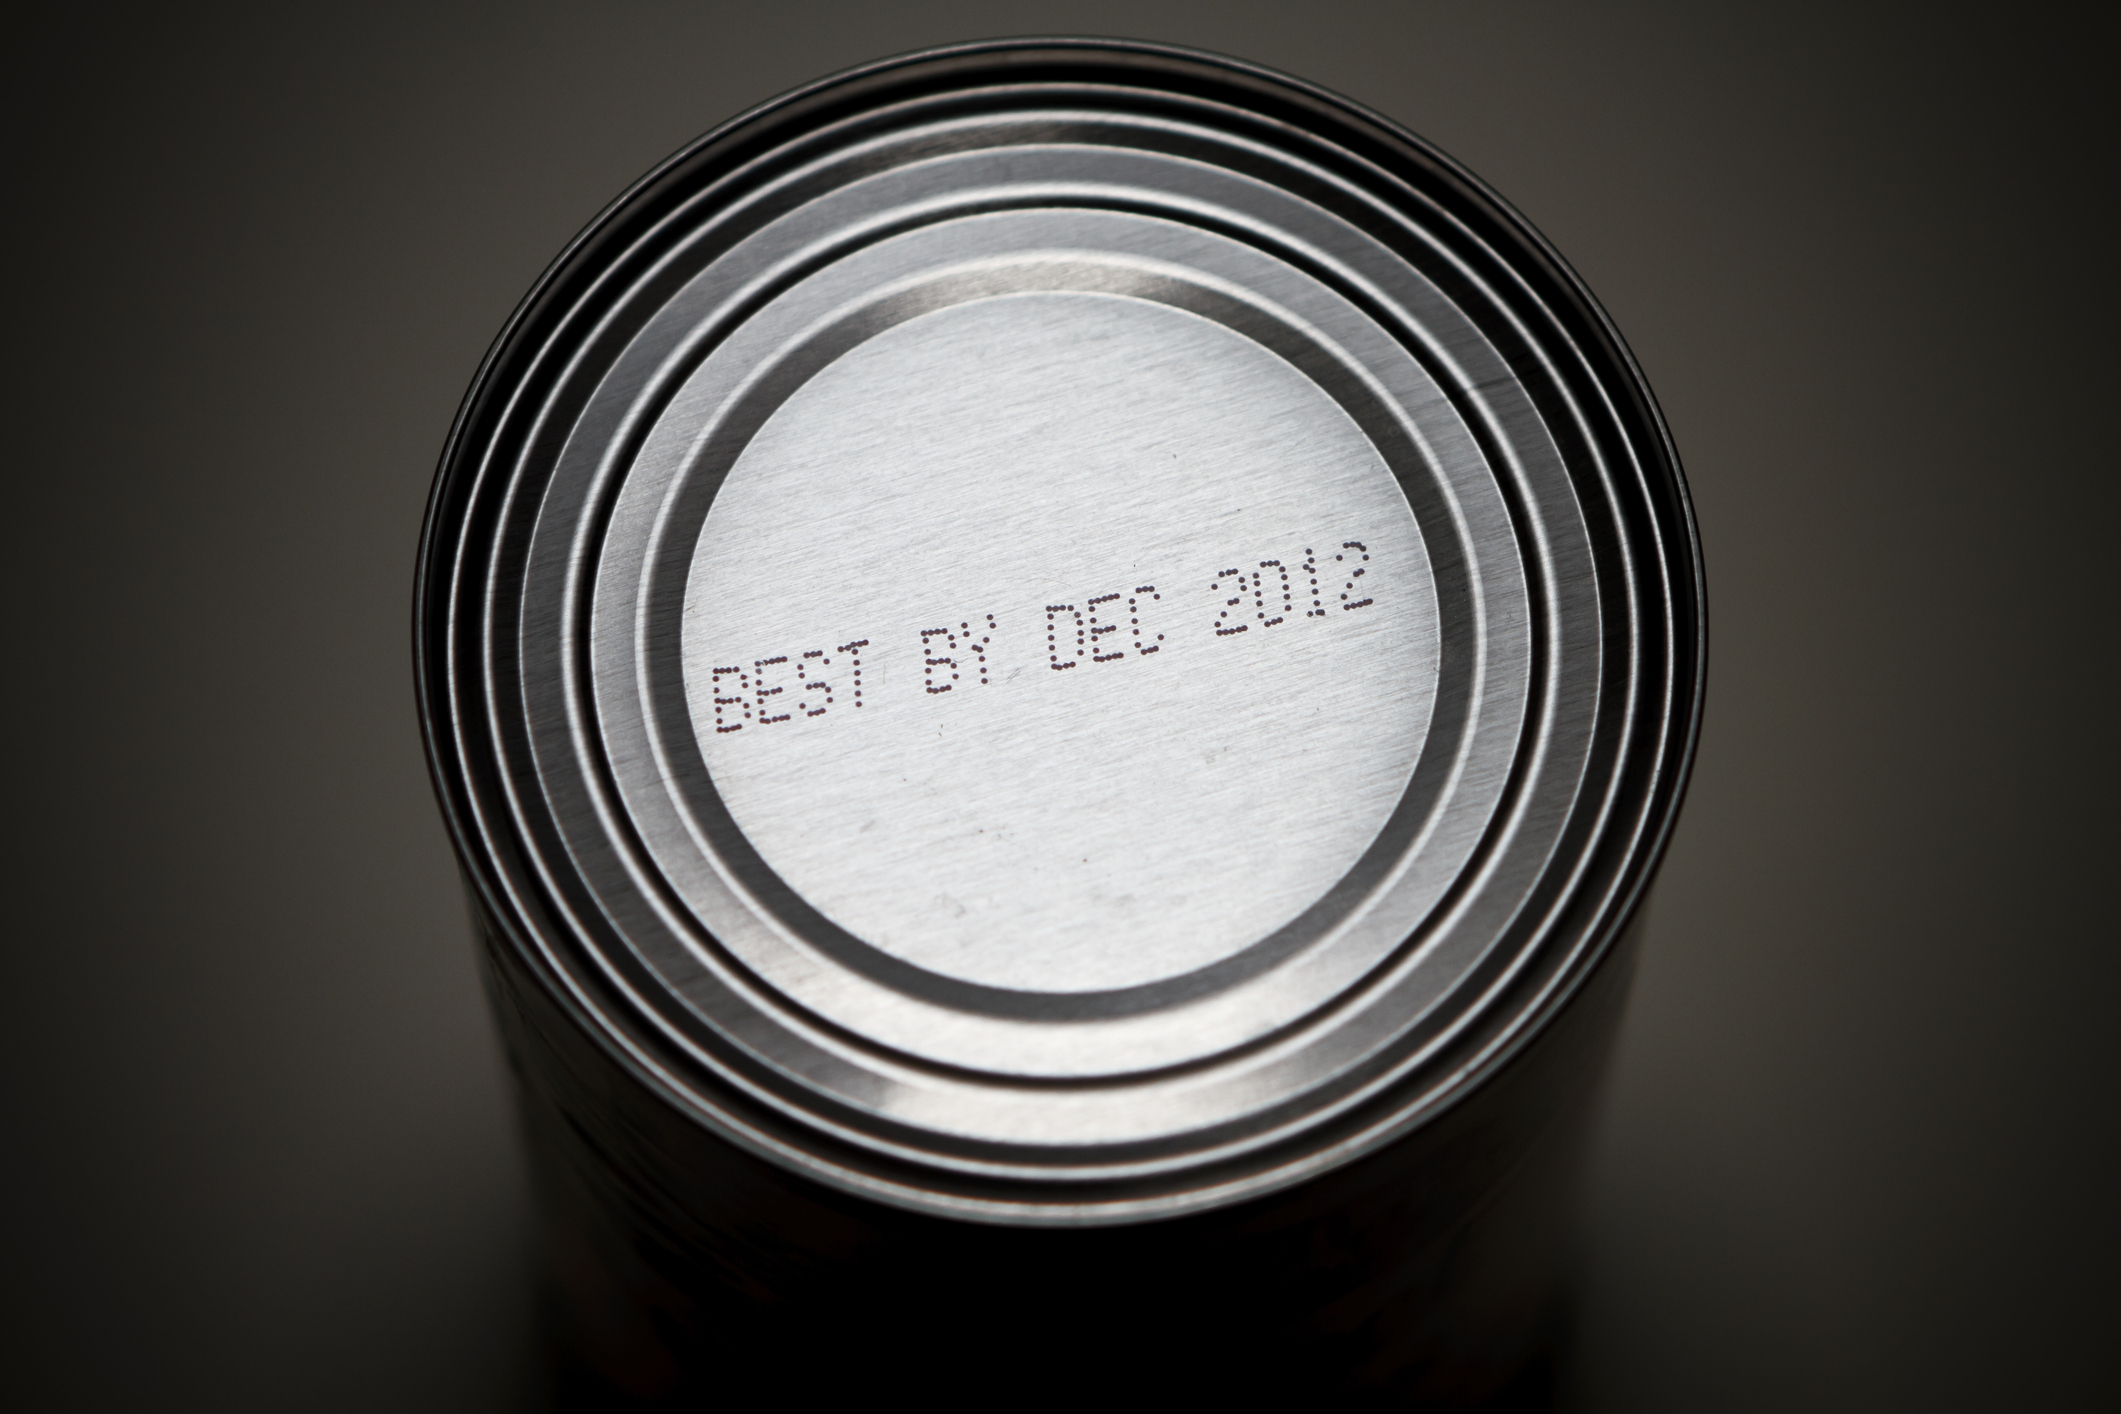 expiration date on can of food